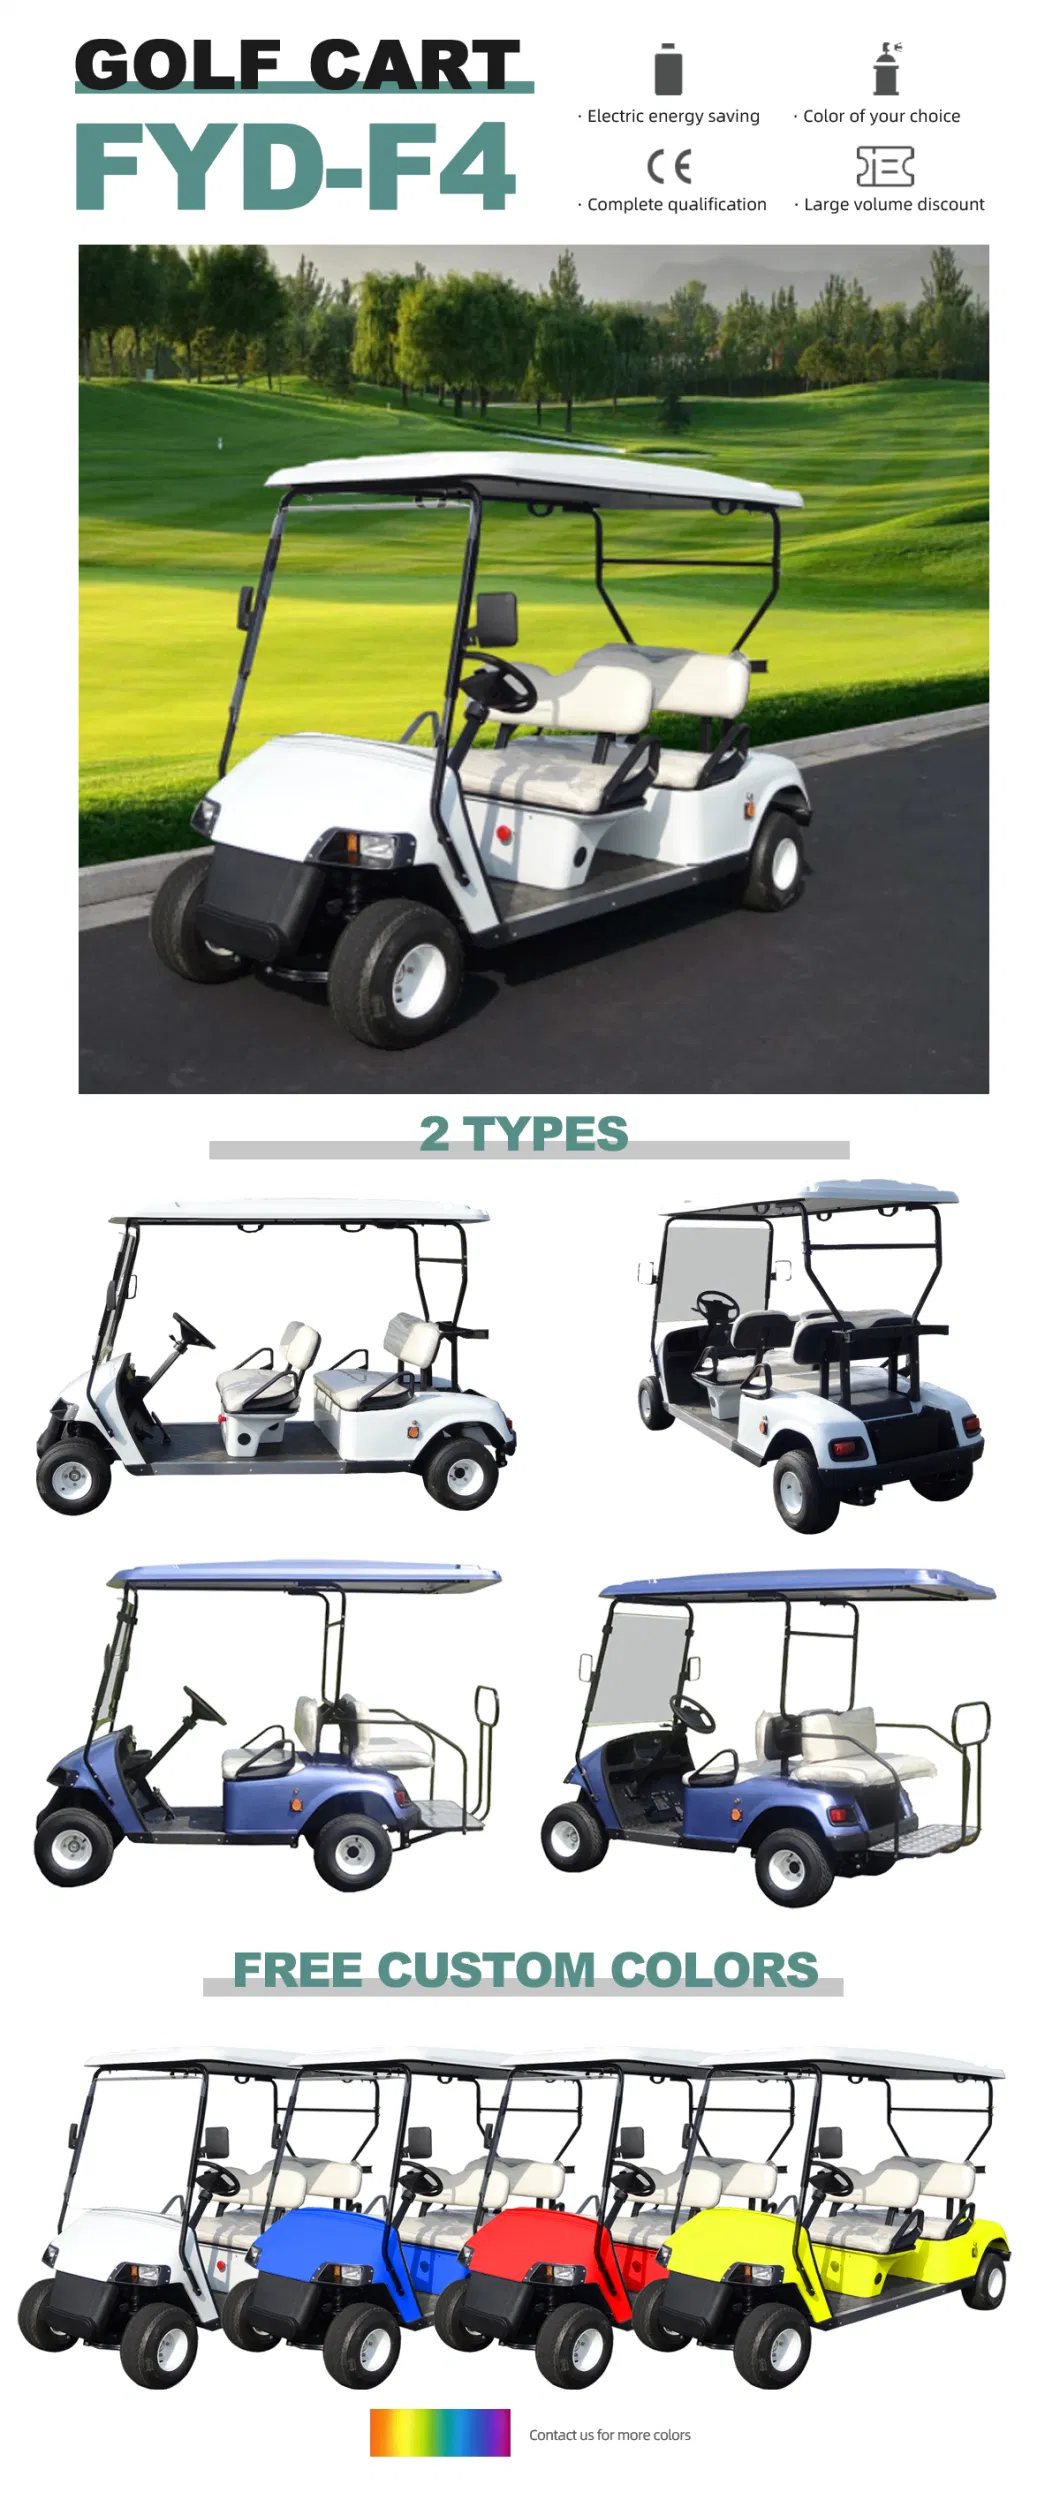 High Speed 4 Wheel Drive Blue Golf Cart with Folding Seats and Extra Storage Space